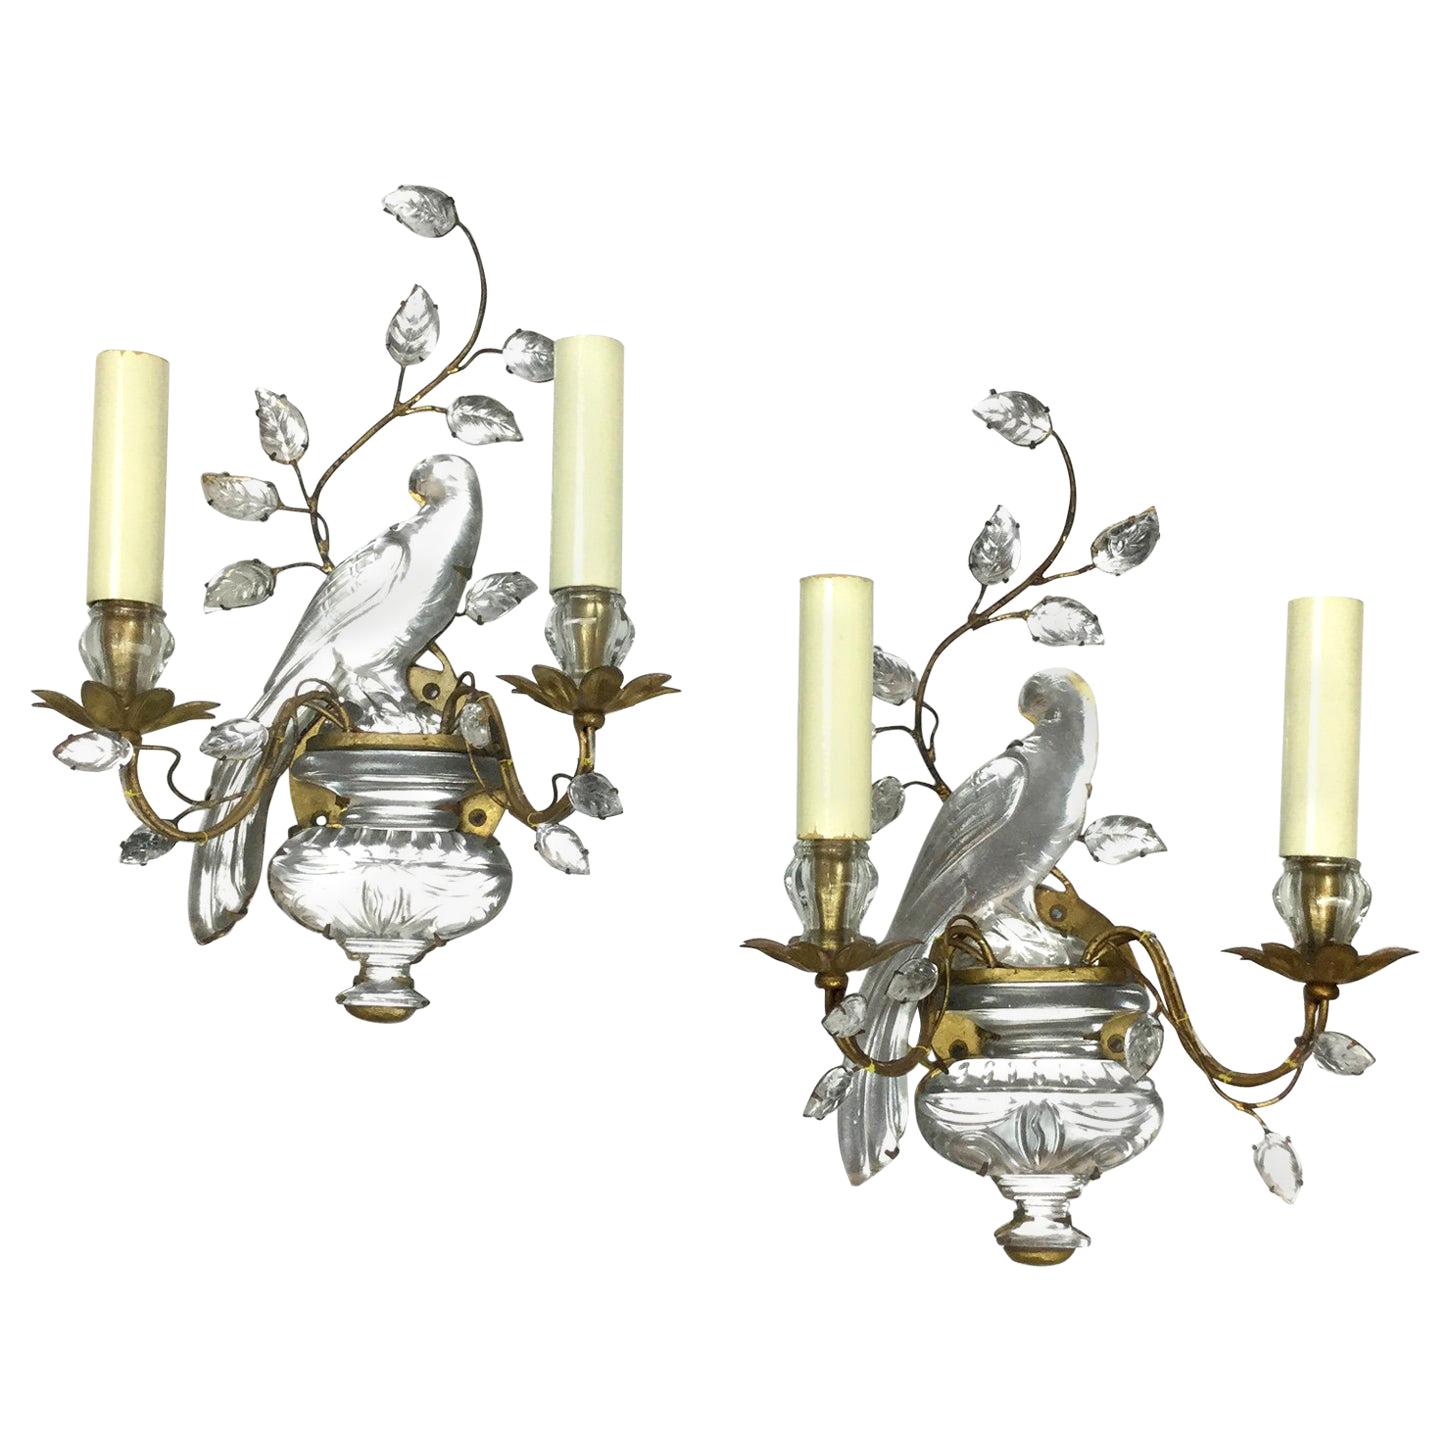 Pair of Maison Baguès sconces
Glass parrots, flowers and leaves supported by gilded branches.